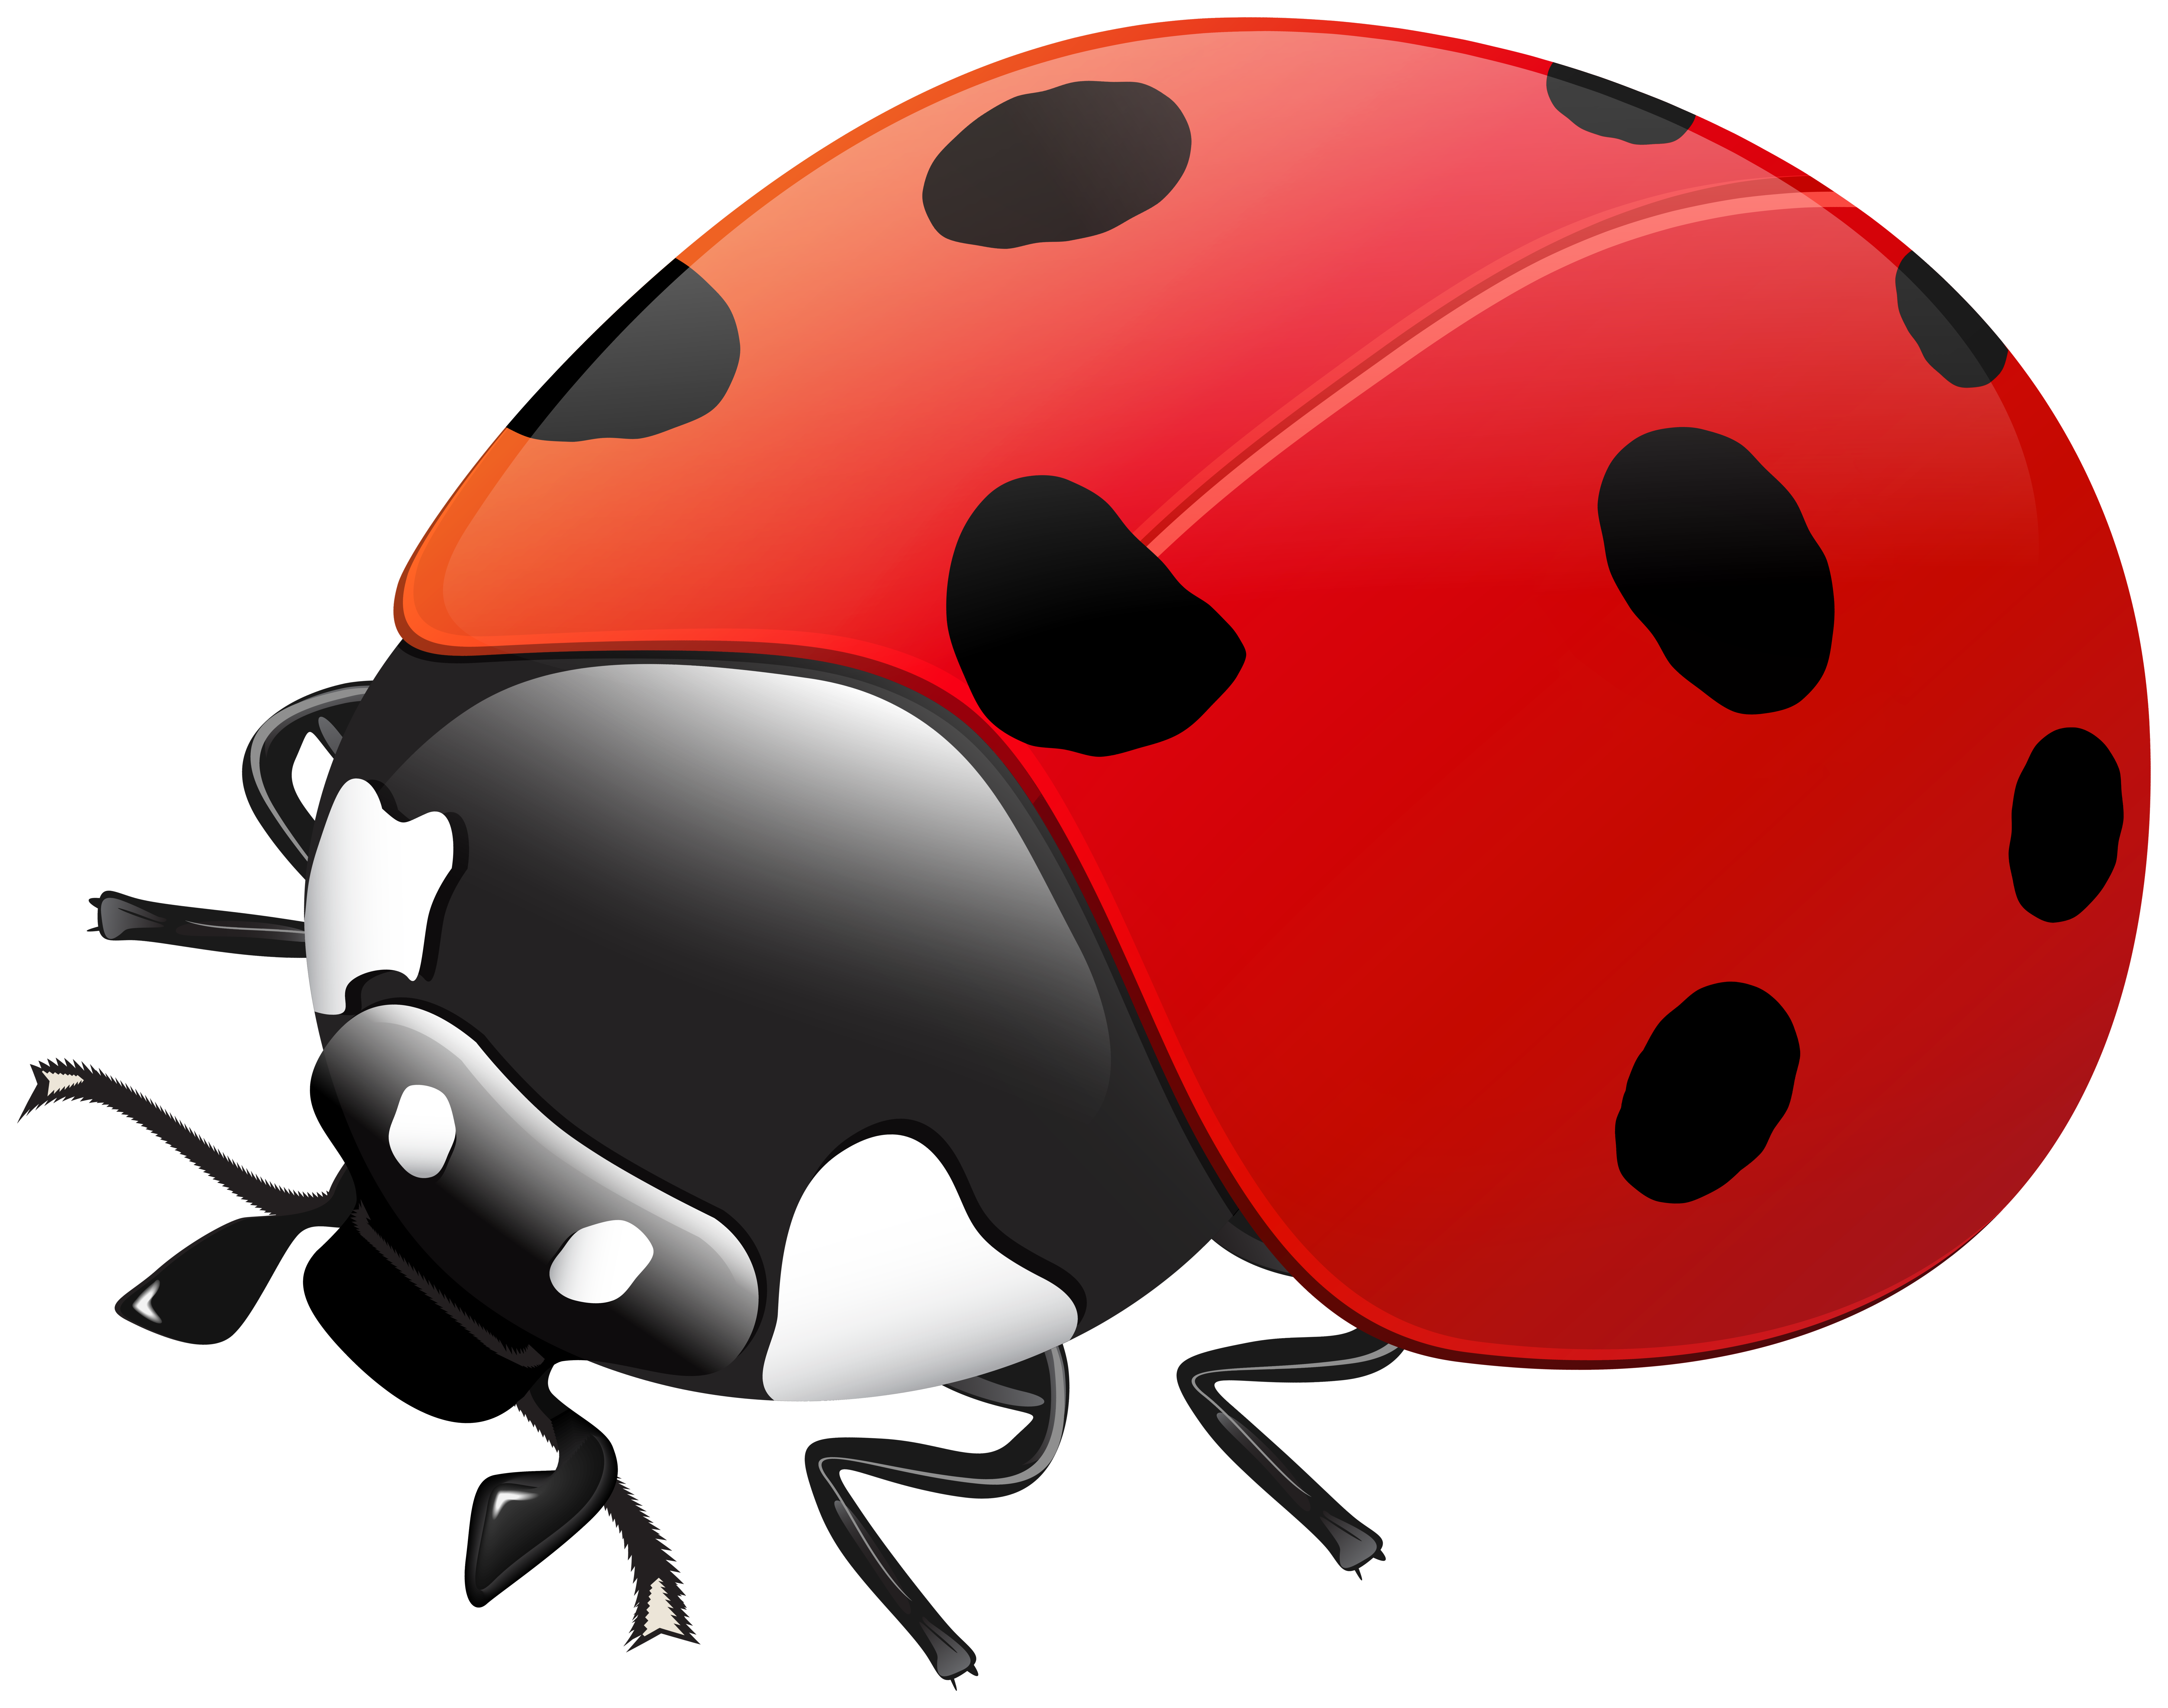 Ladybug Transparent Image Gallery Yopriceville High Quality Images And Transparent Png Free Clipart